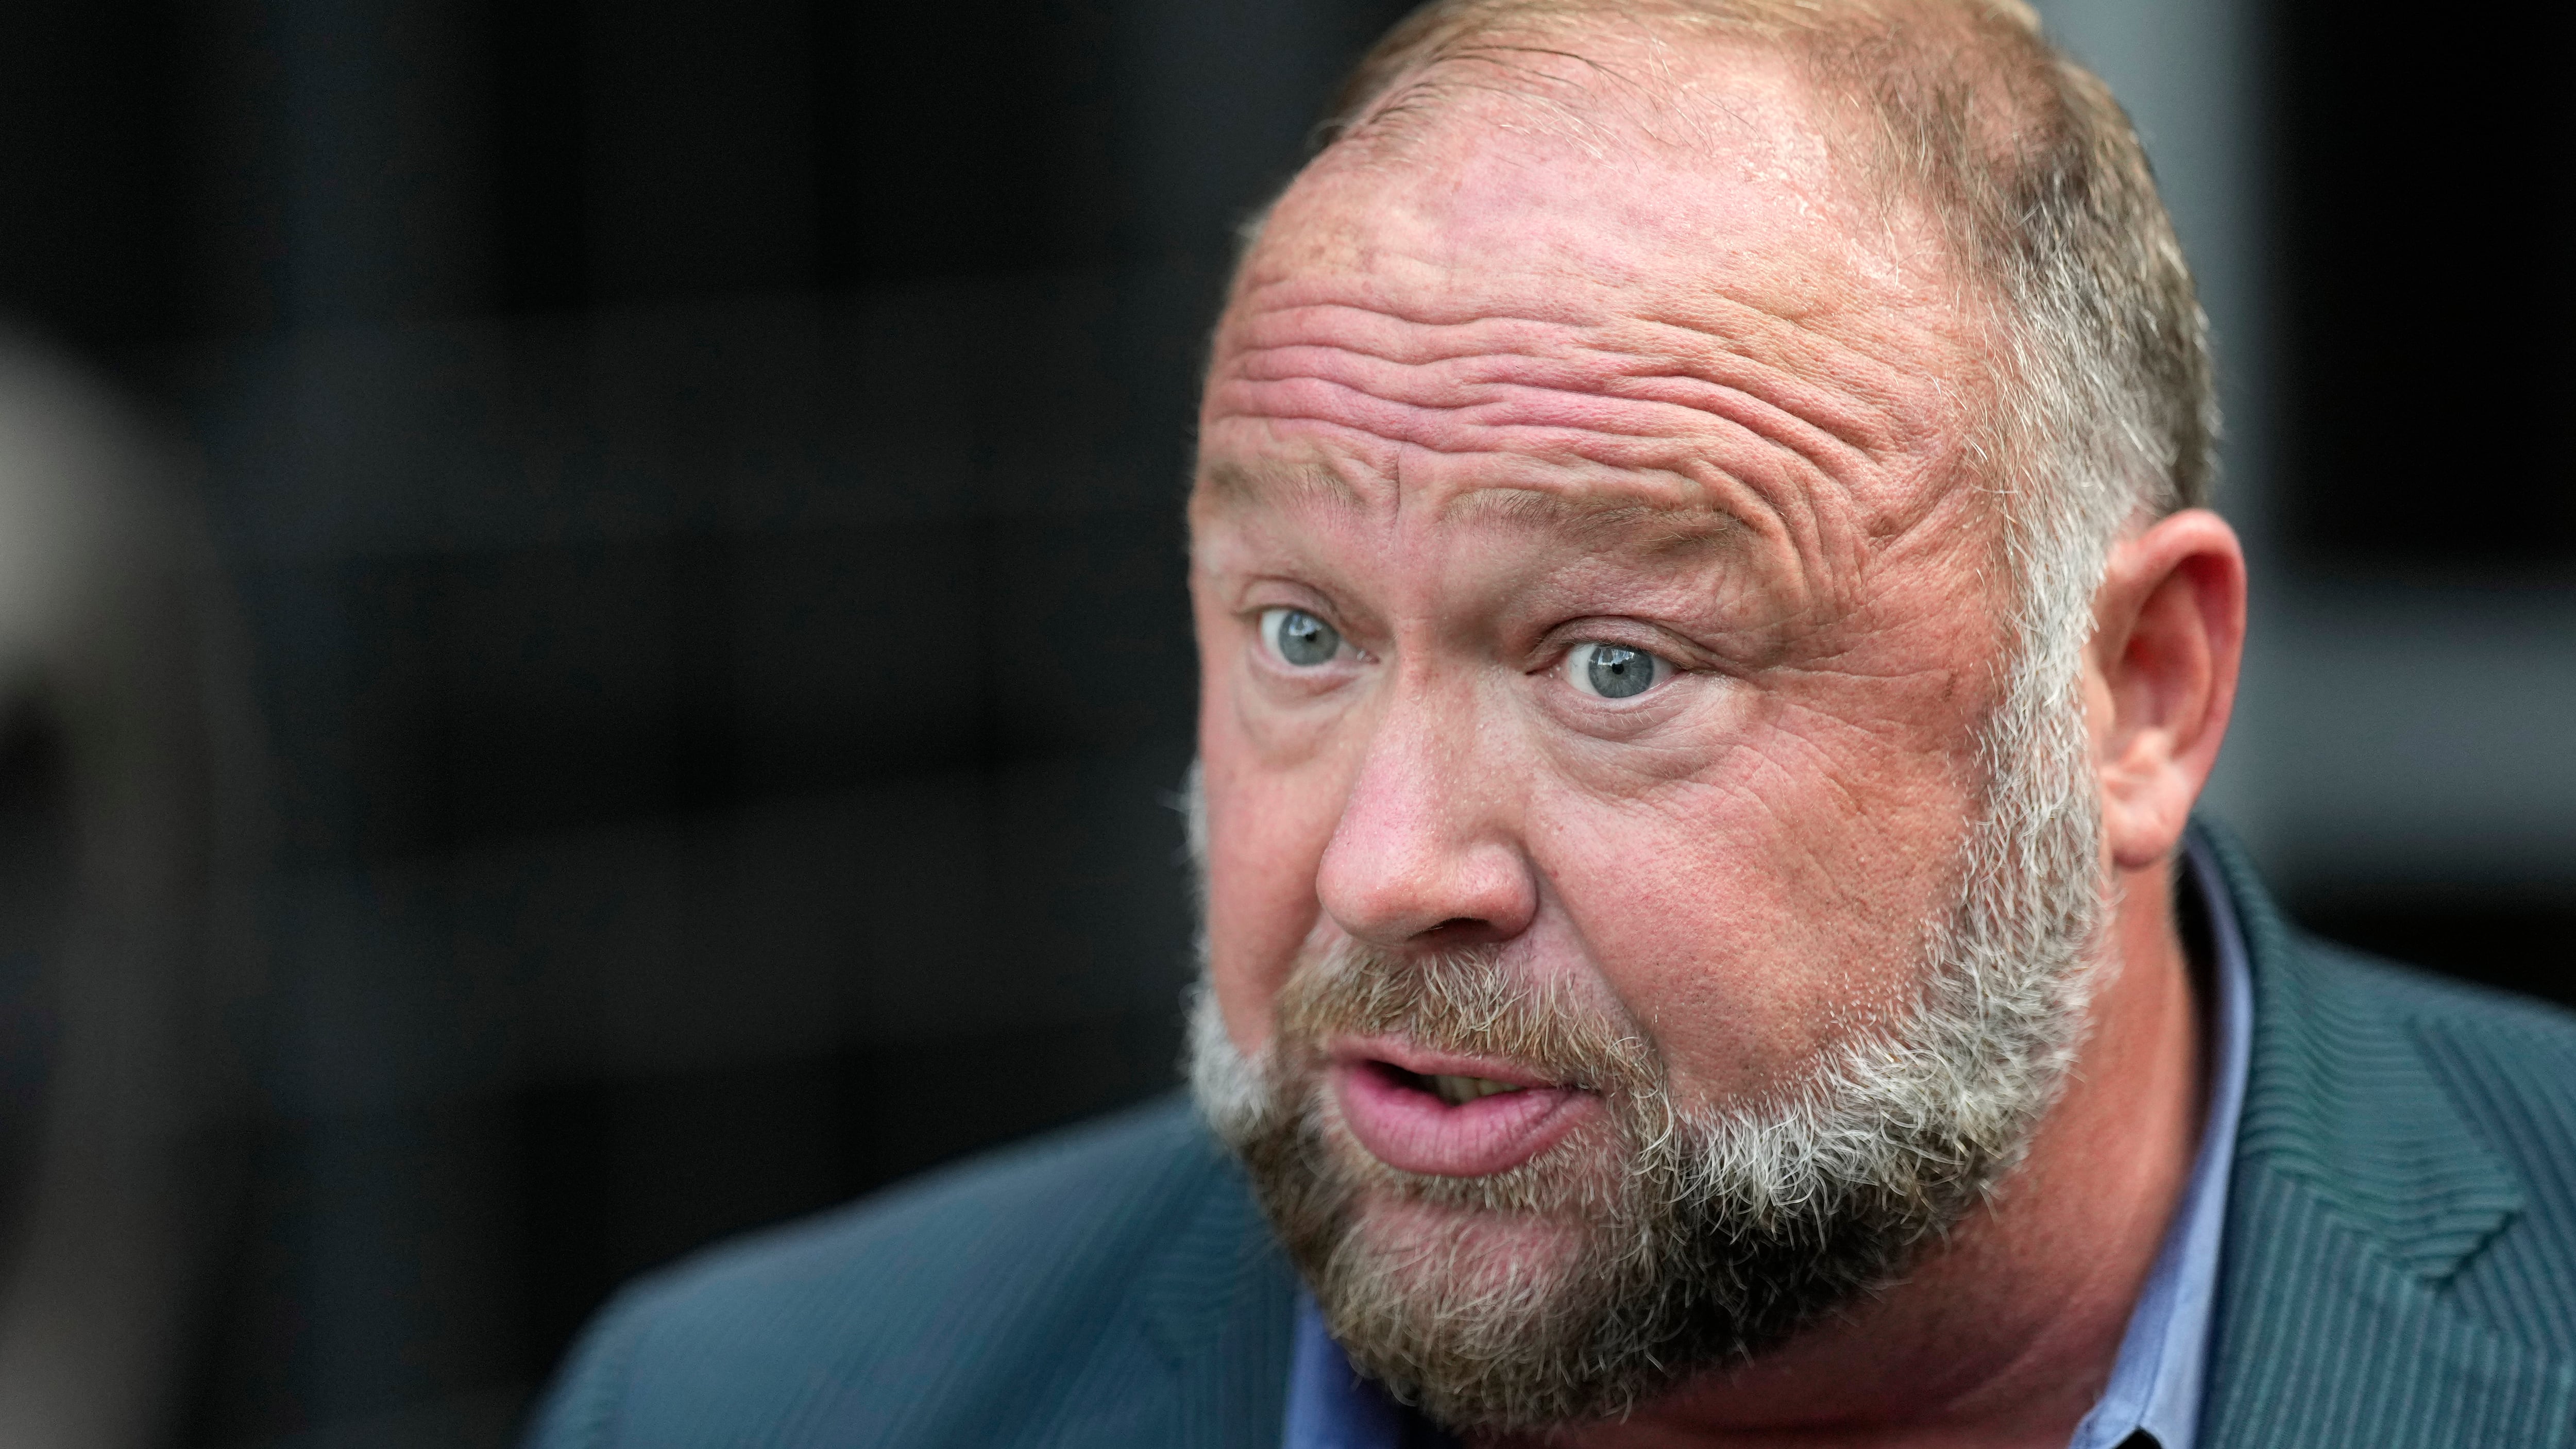 Alex Jones speaks to the media after arriving at court in Houston, Texas, for a hearing in front of a bankruptcy judge on Friday (David J Phillip/AP)